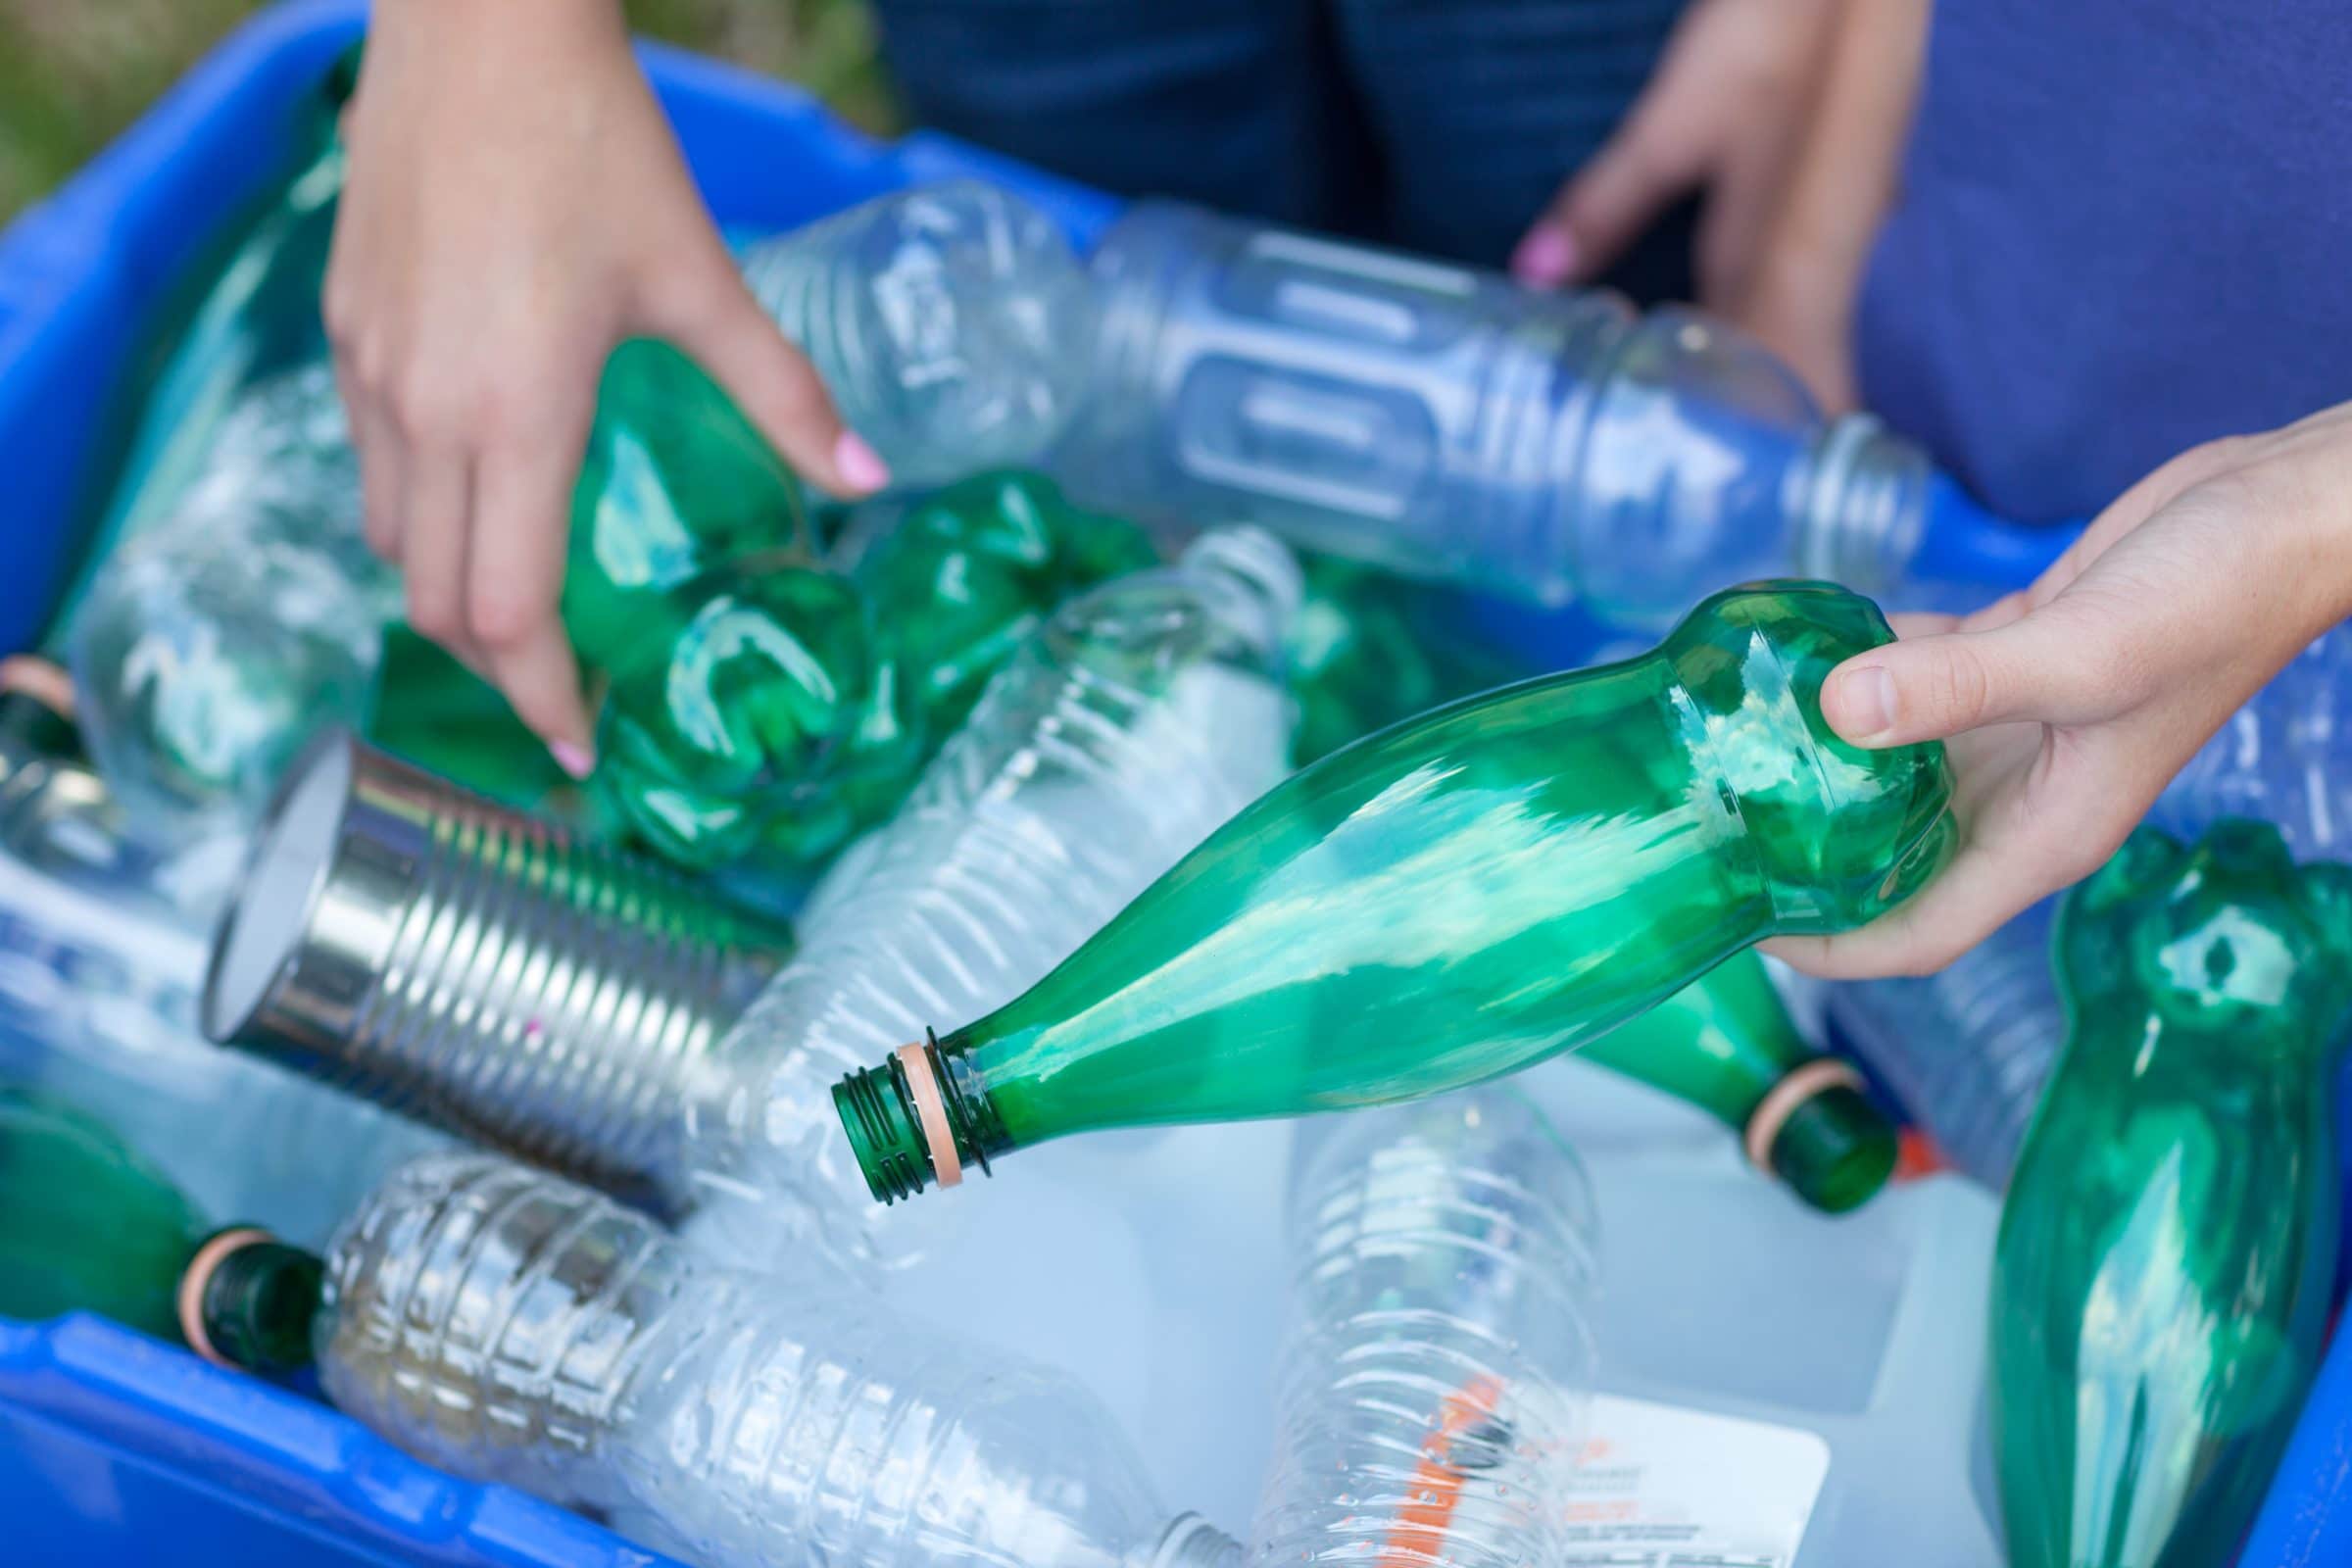 Two sets of hands organize plastic water bottles in a blue recycling bin.